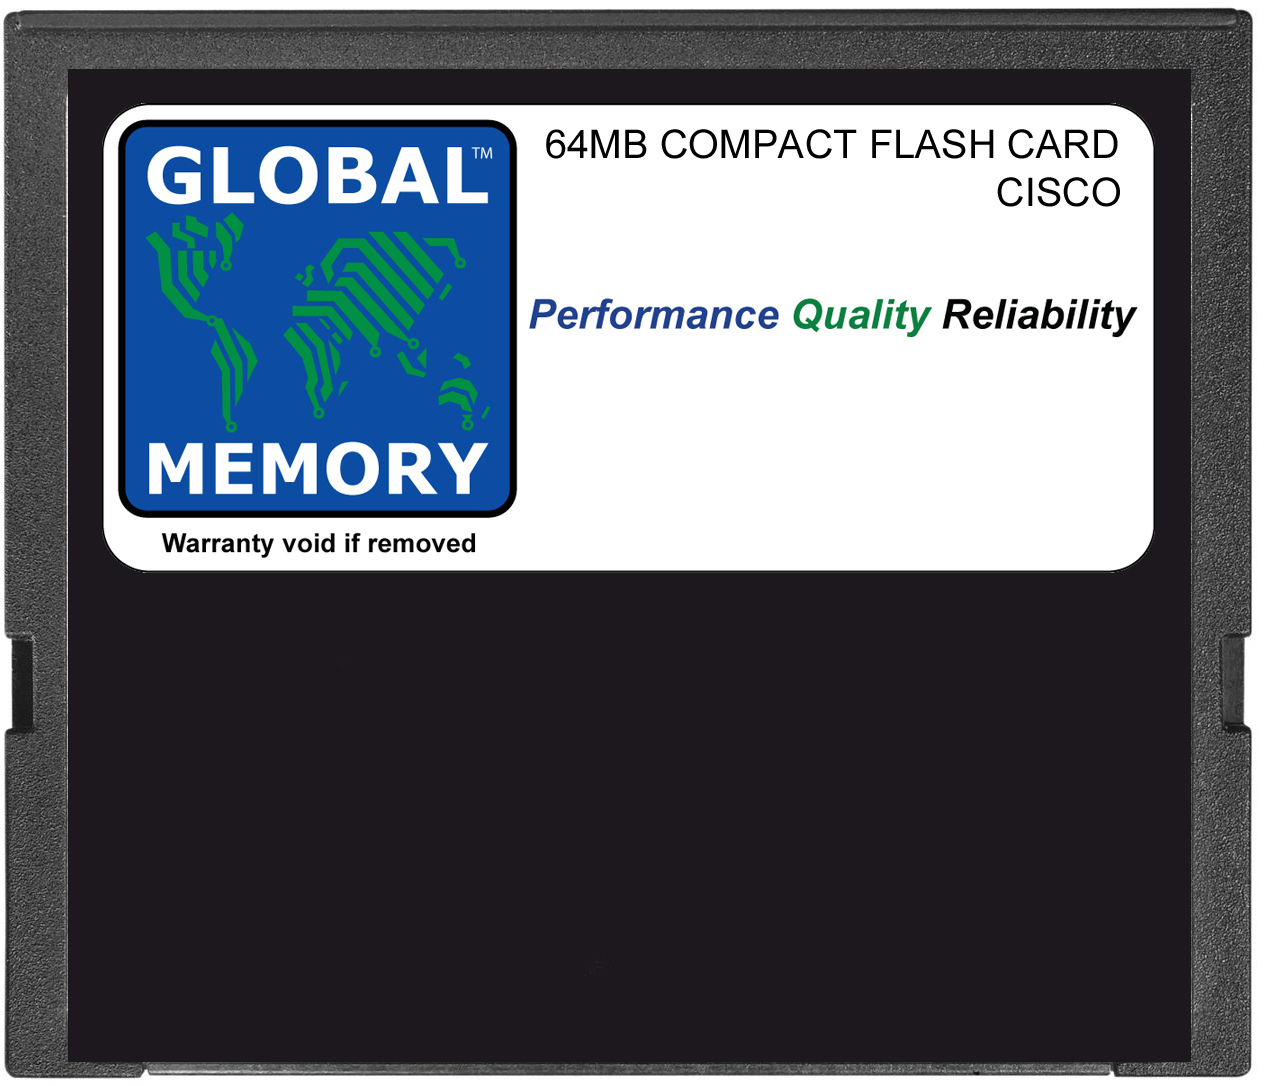 64MB COMPACT FLASH CARD MEMORY FOR CISCO 3725 ROUTER (MEM3725-64CF)